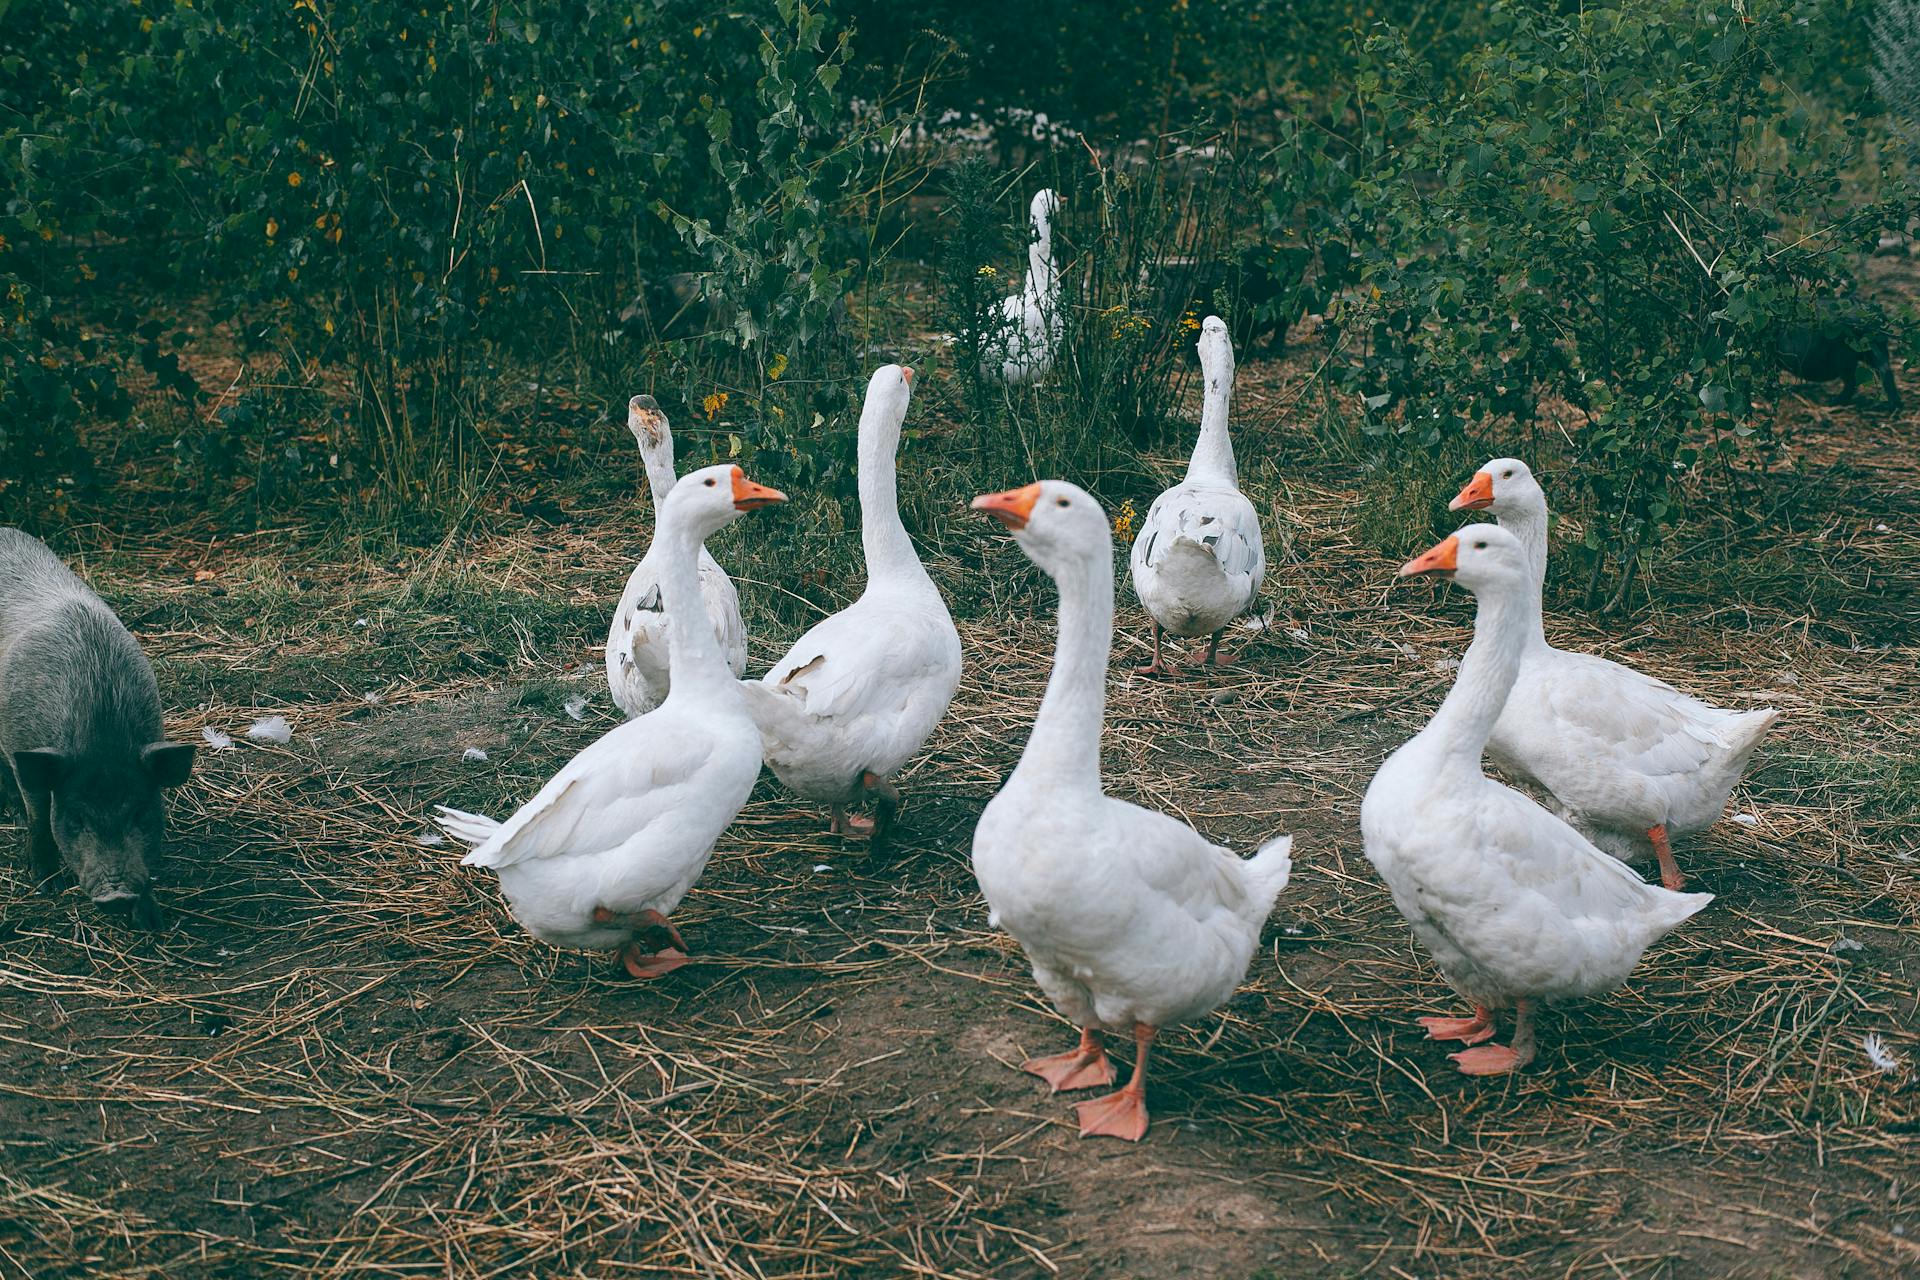 Gaggle of white geese and black pig walking near green bushes in countryside